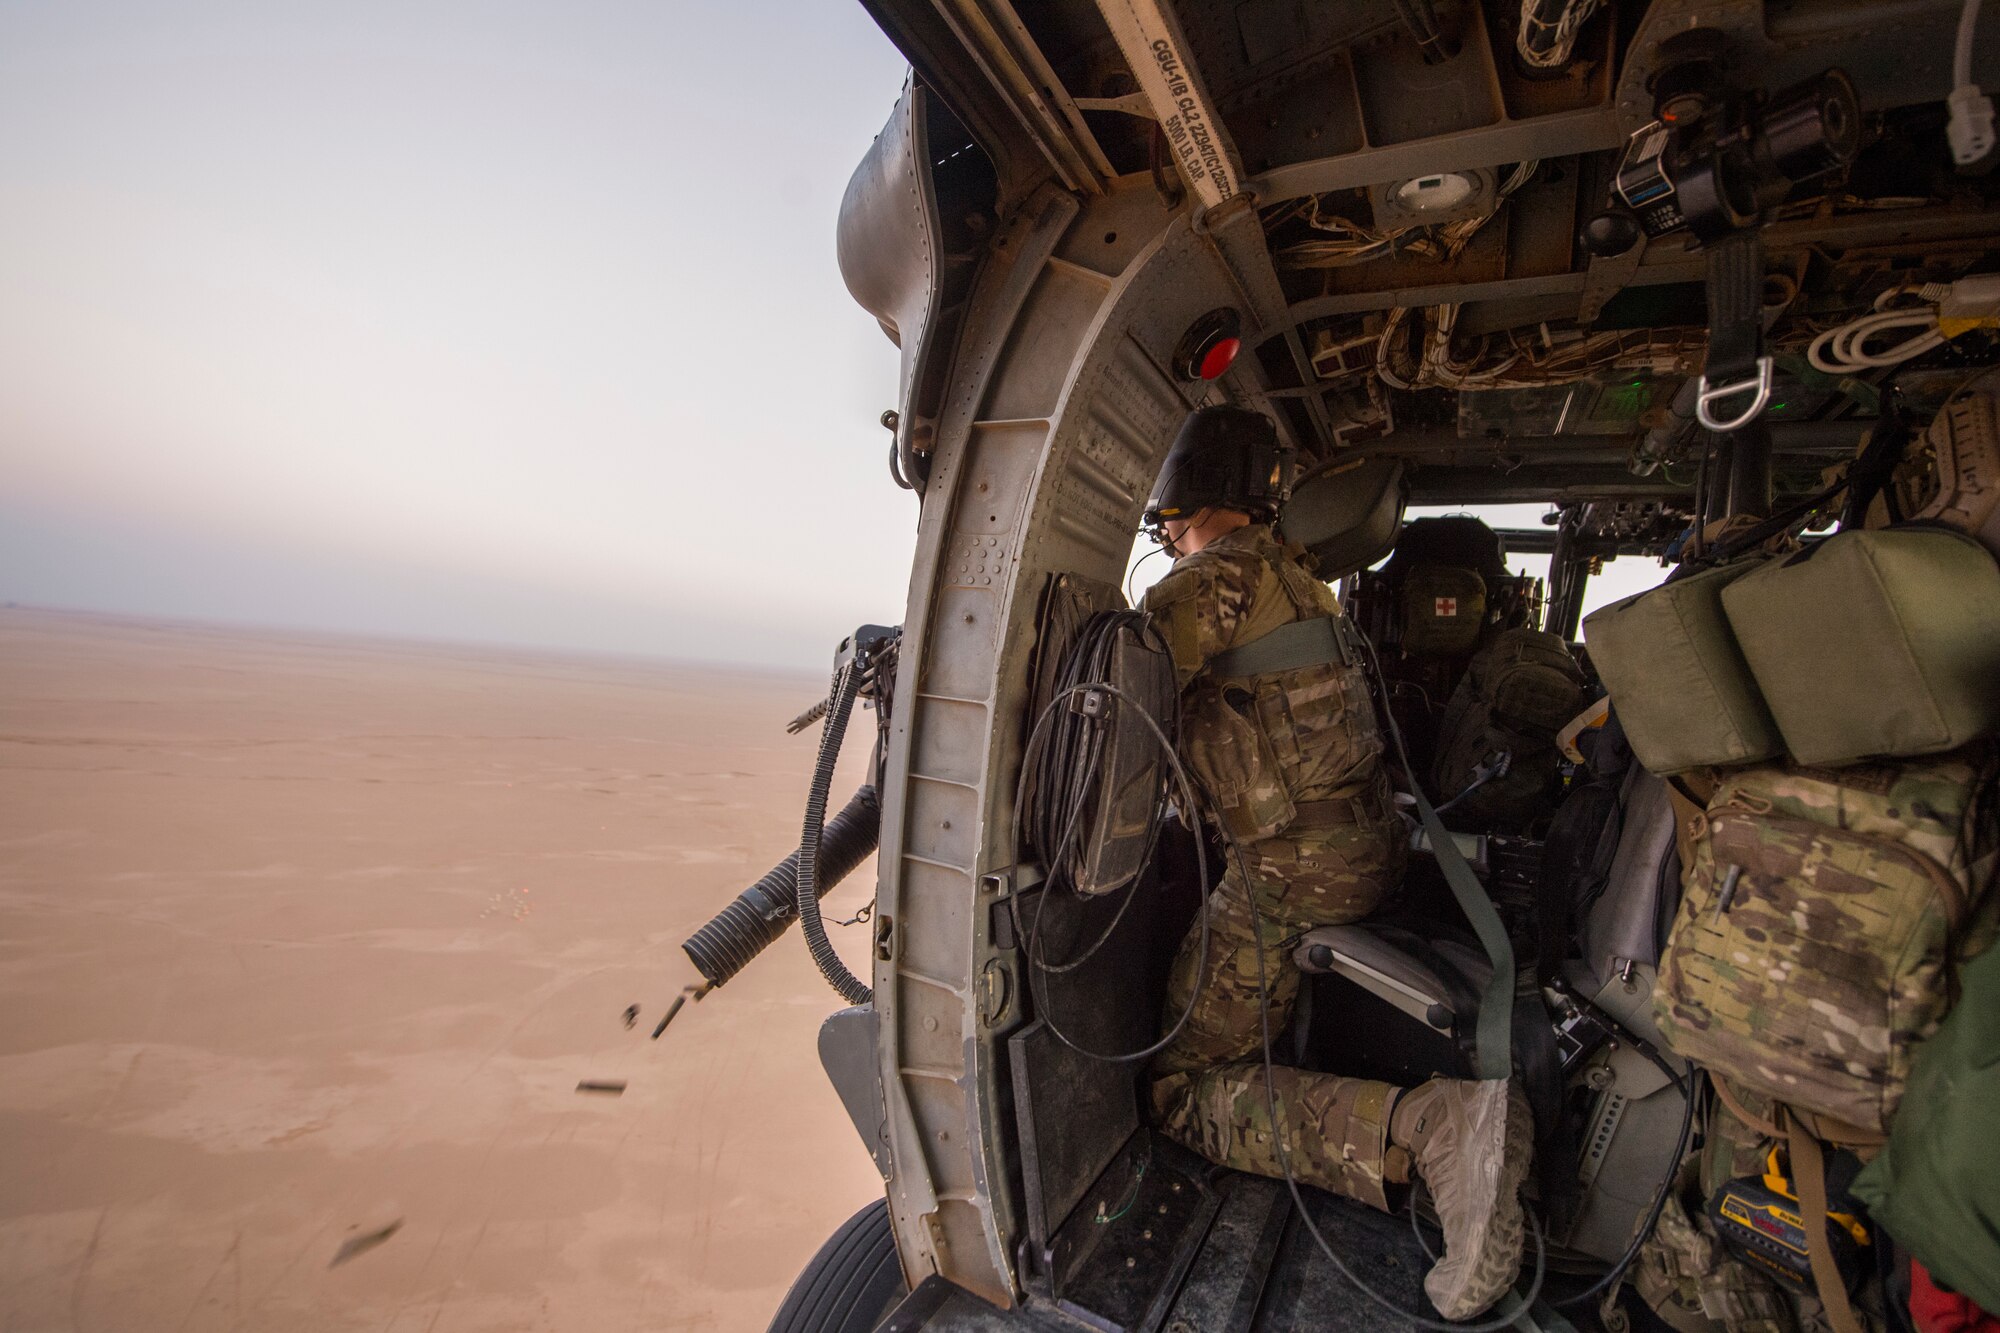 A U.S. Air Force special mission aviator assigned to the 46th Expeditionary Rescue Squadron (ERQS) test fires a .50 caliber GAU-18 during a training mission over Iraq, July 18, 2018. The 46th ERQS provides combat search and rescue capabilities across the region in support of Operation Inherent Resolve. In conjunction with partner forces, Combined Joint Task Force - Operation Inherent Resolve defeats ISIS in designated areas of Iraq and Syria and sets conditions for follow-on operations to increase regional stability.(U.S. Air Force photo by Staff Sgt. Keith James)